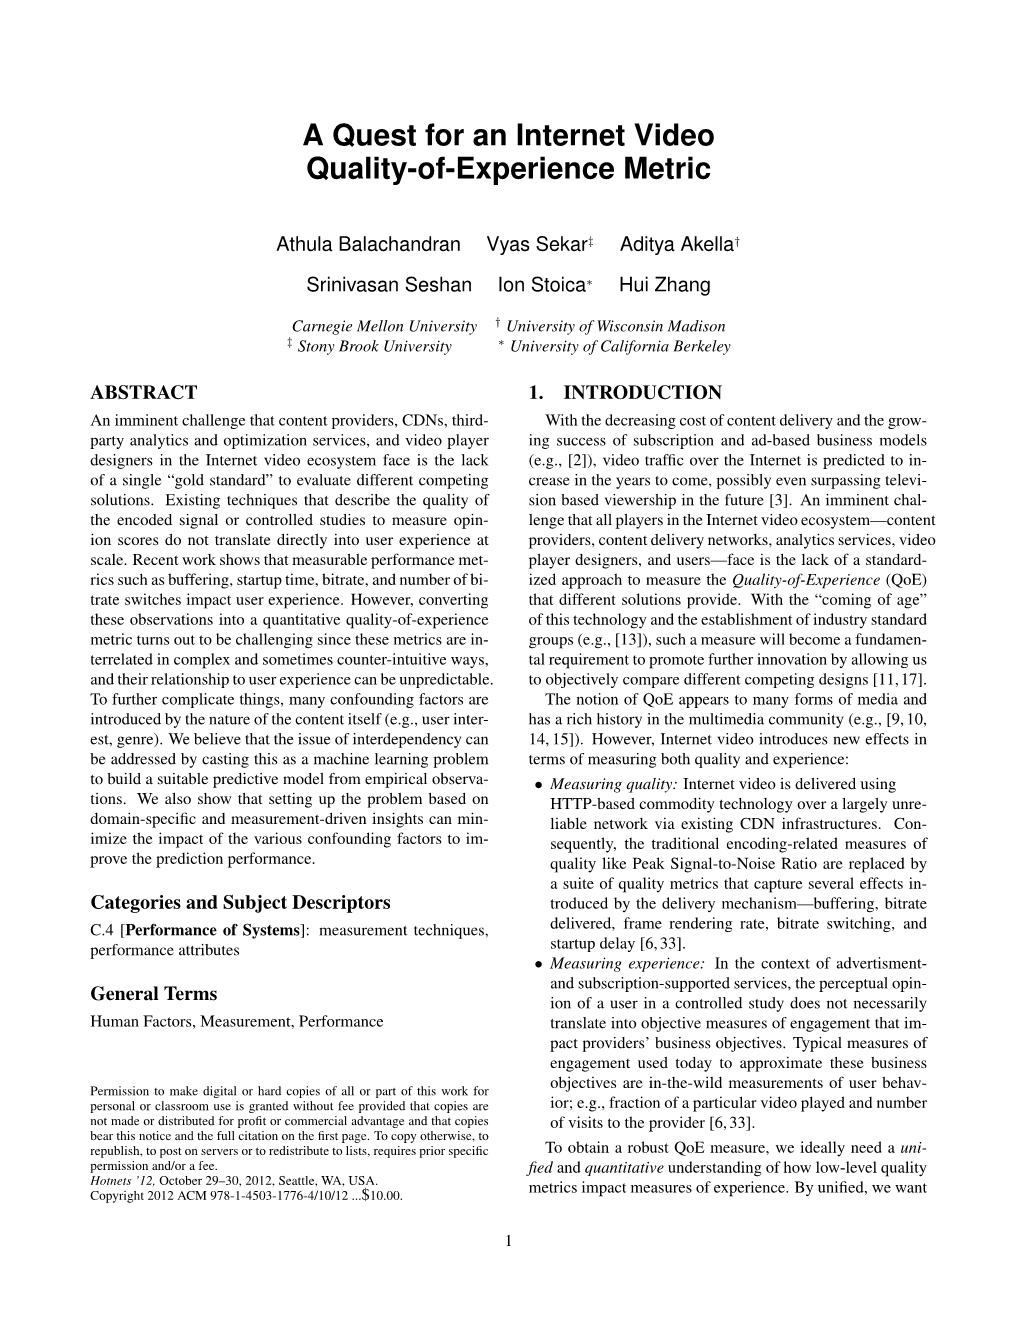 A Quest for an Internet Video Quality-Of-Experience Metric